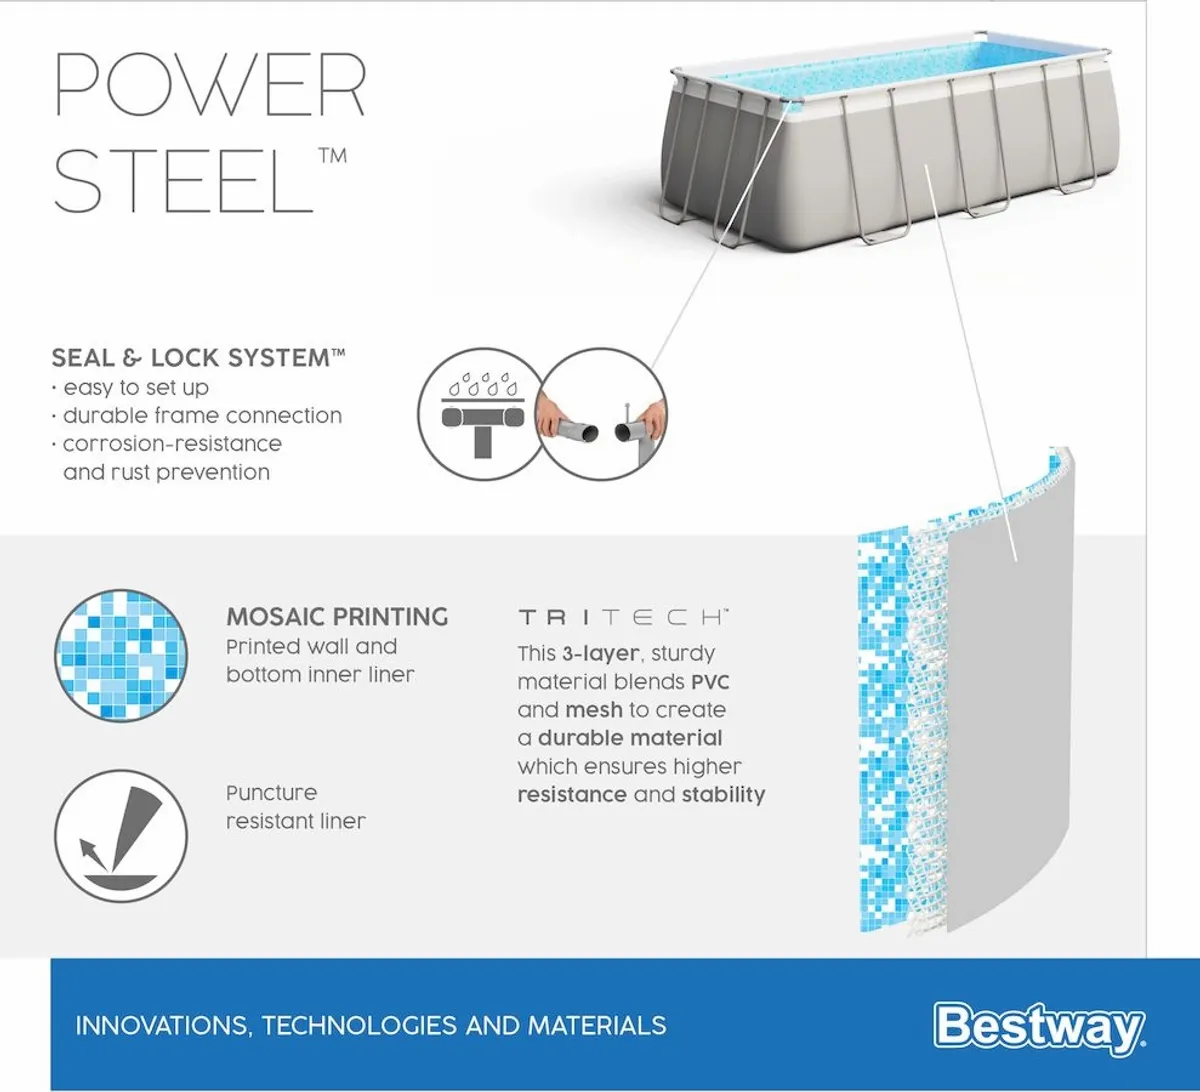 Bestway Power Steel Rectangular pool - 282 x 196 x 84 cm - with filter pump and accessories